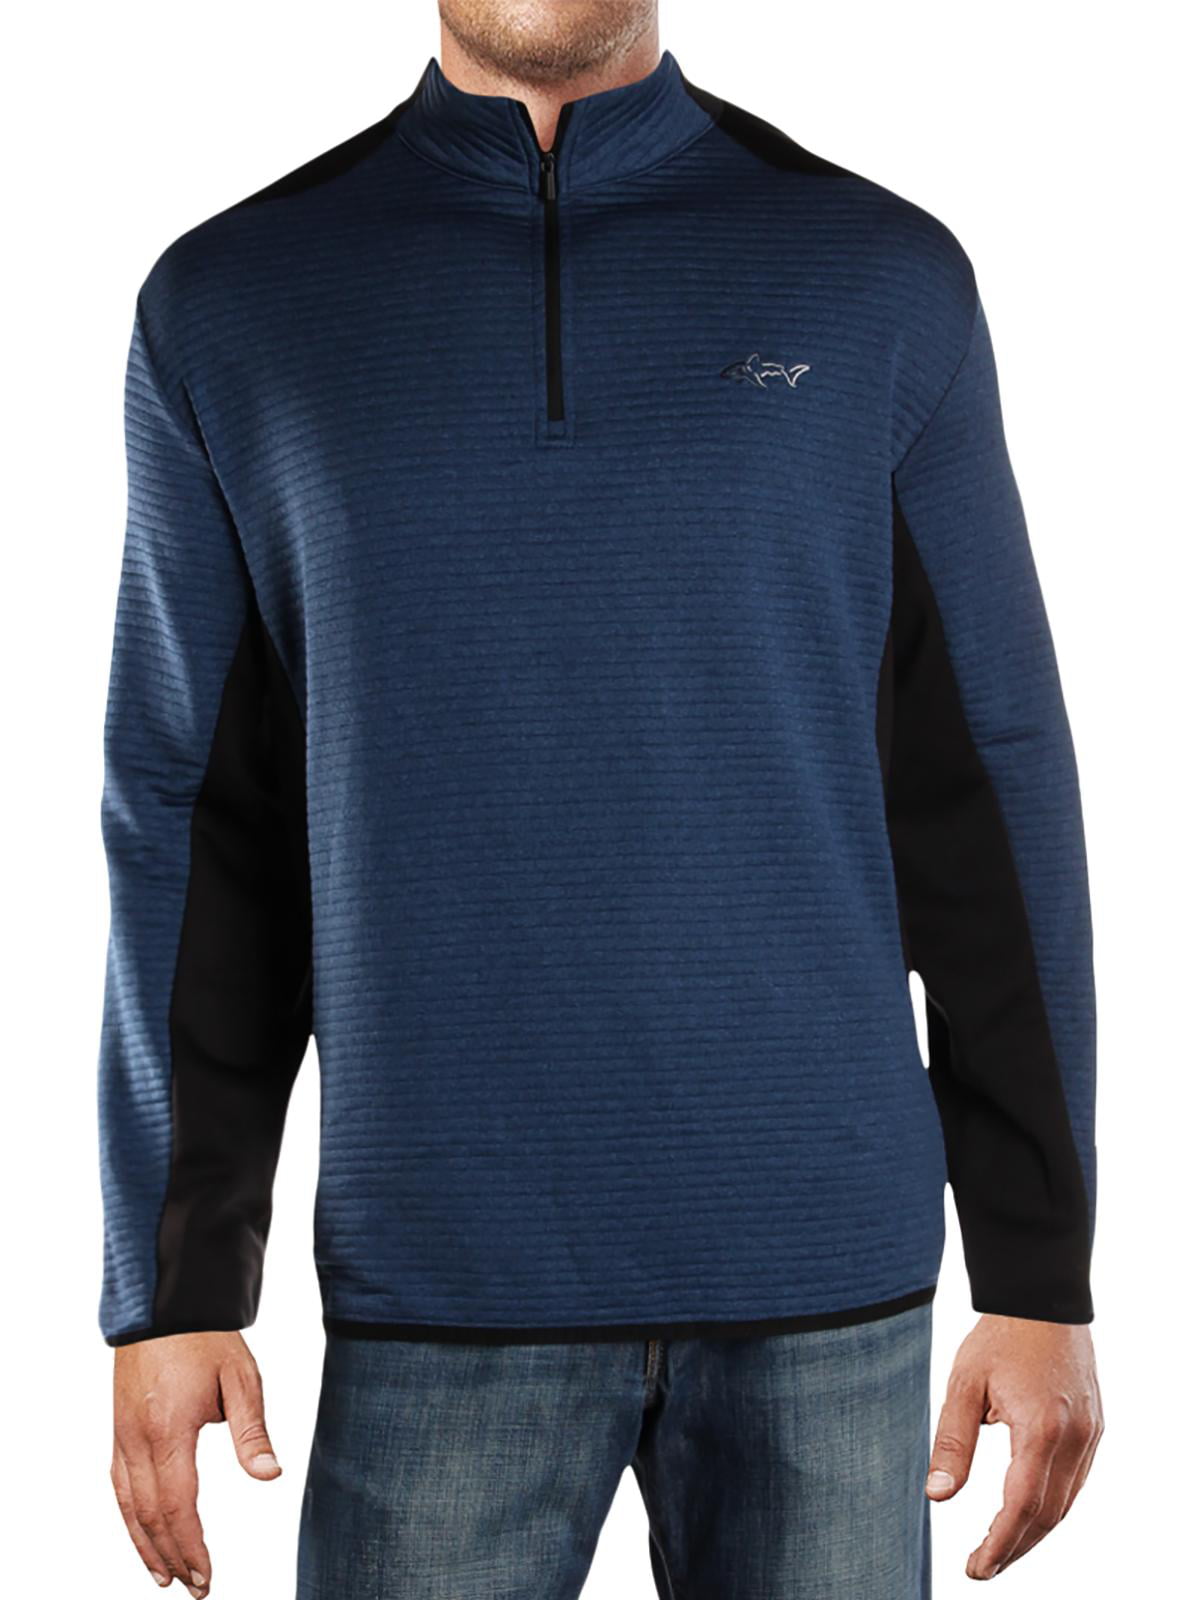 Greg Norman Mens Colorblock Long Sleeves Casual 1/4 Zip Pullover BHFO 1070